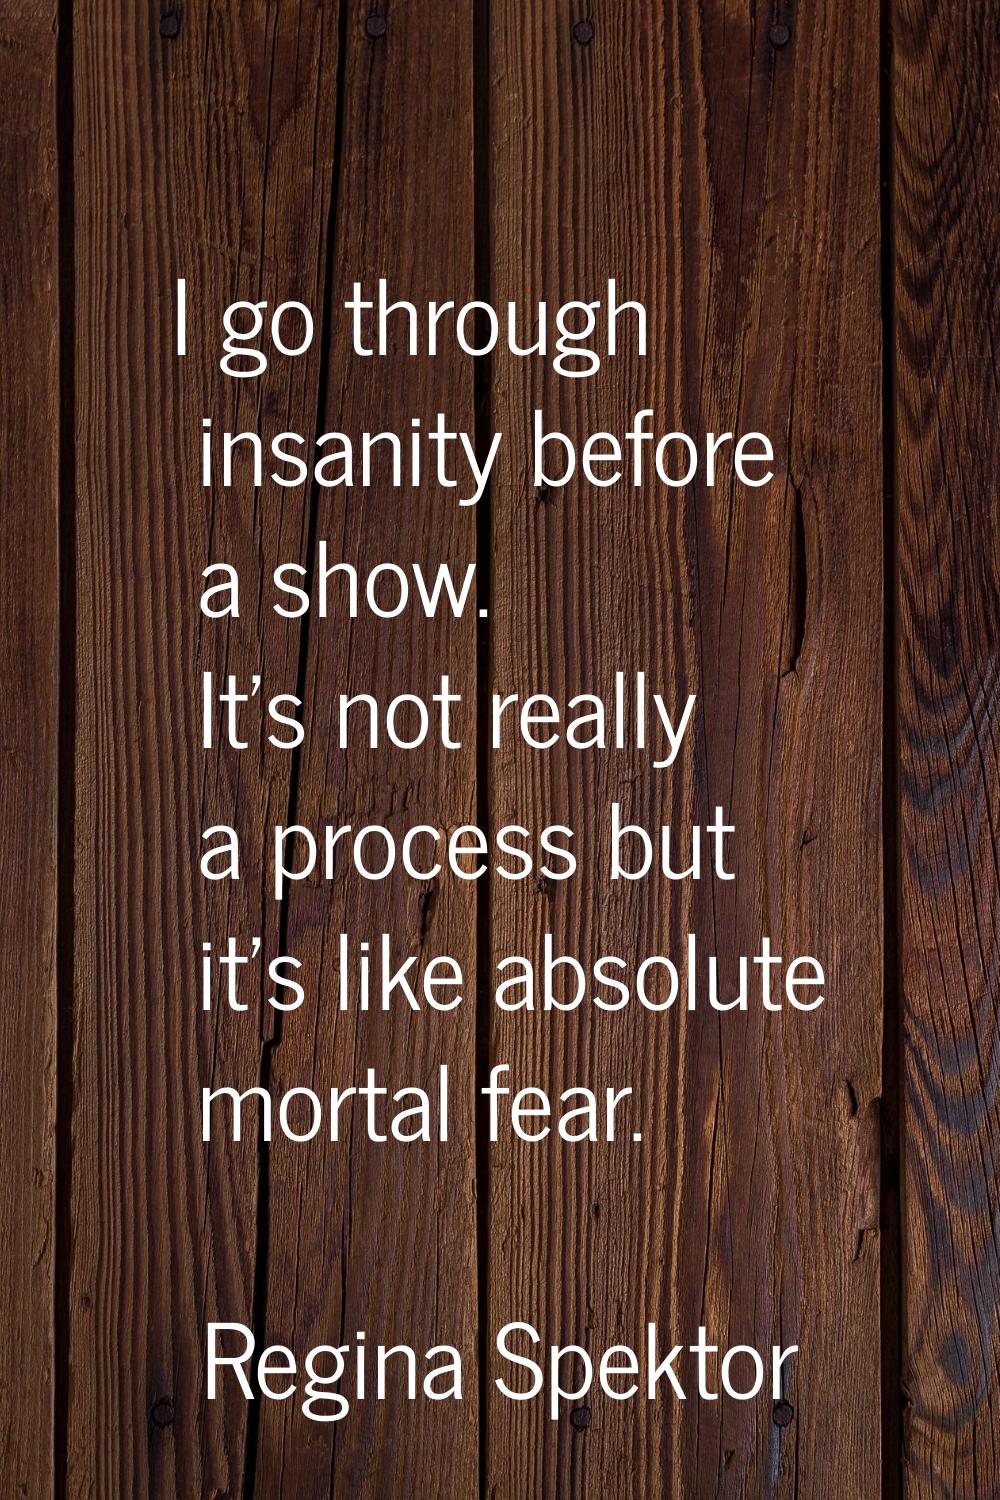 I go through insanity before a show. It's not really a process but it's like absolute mortal fear.